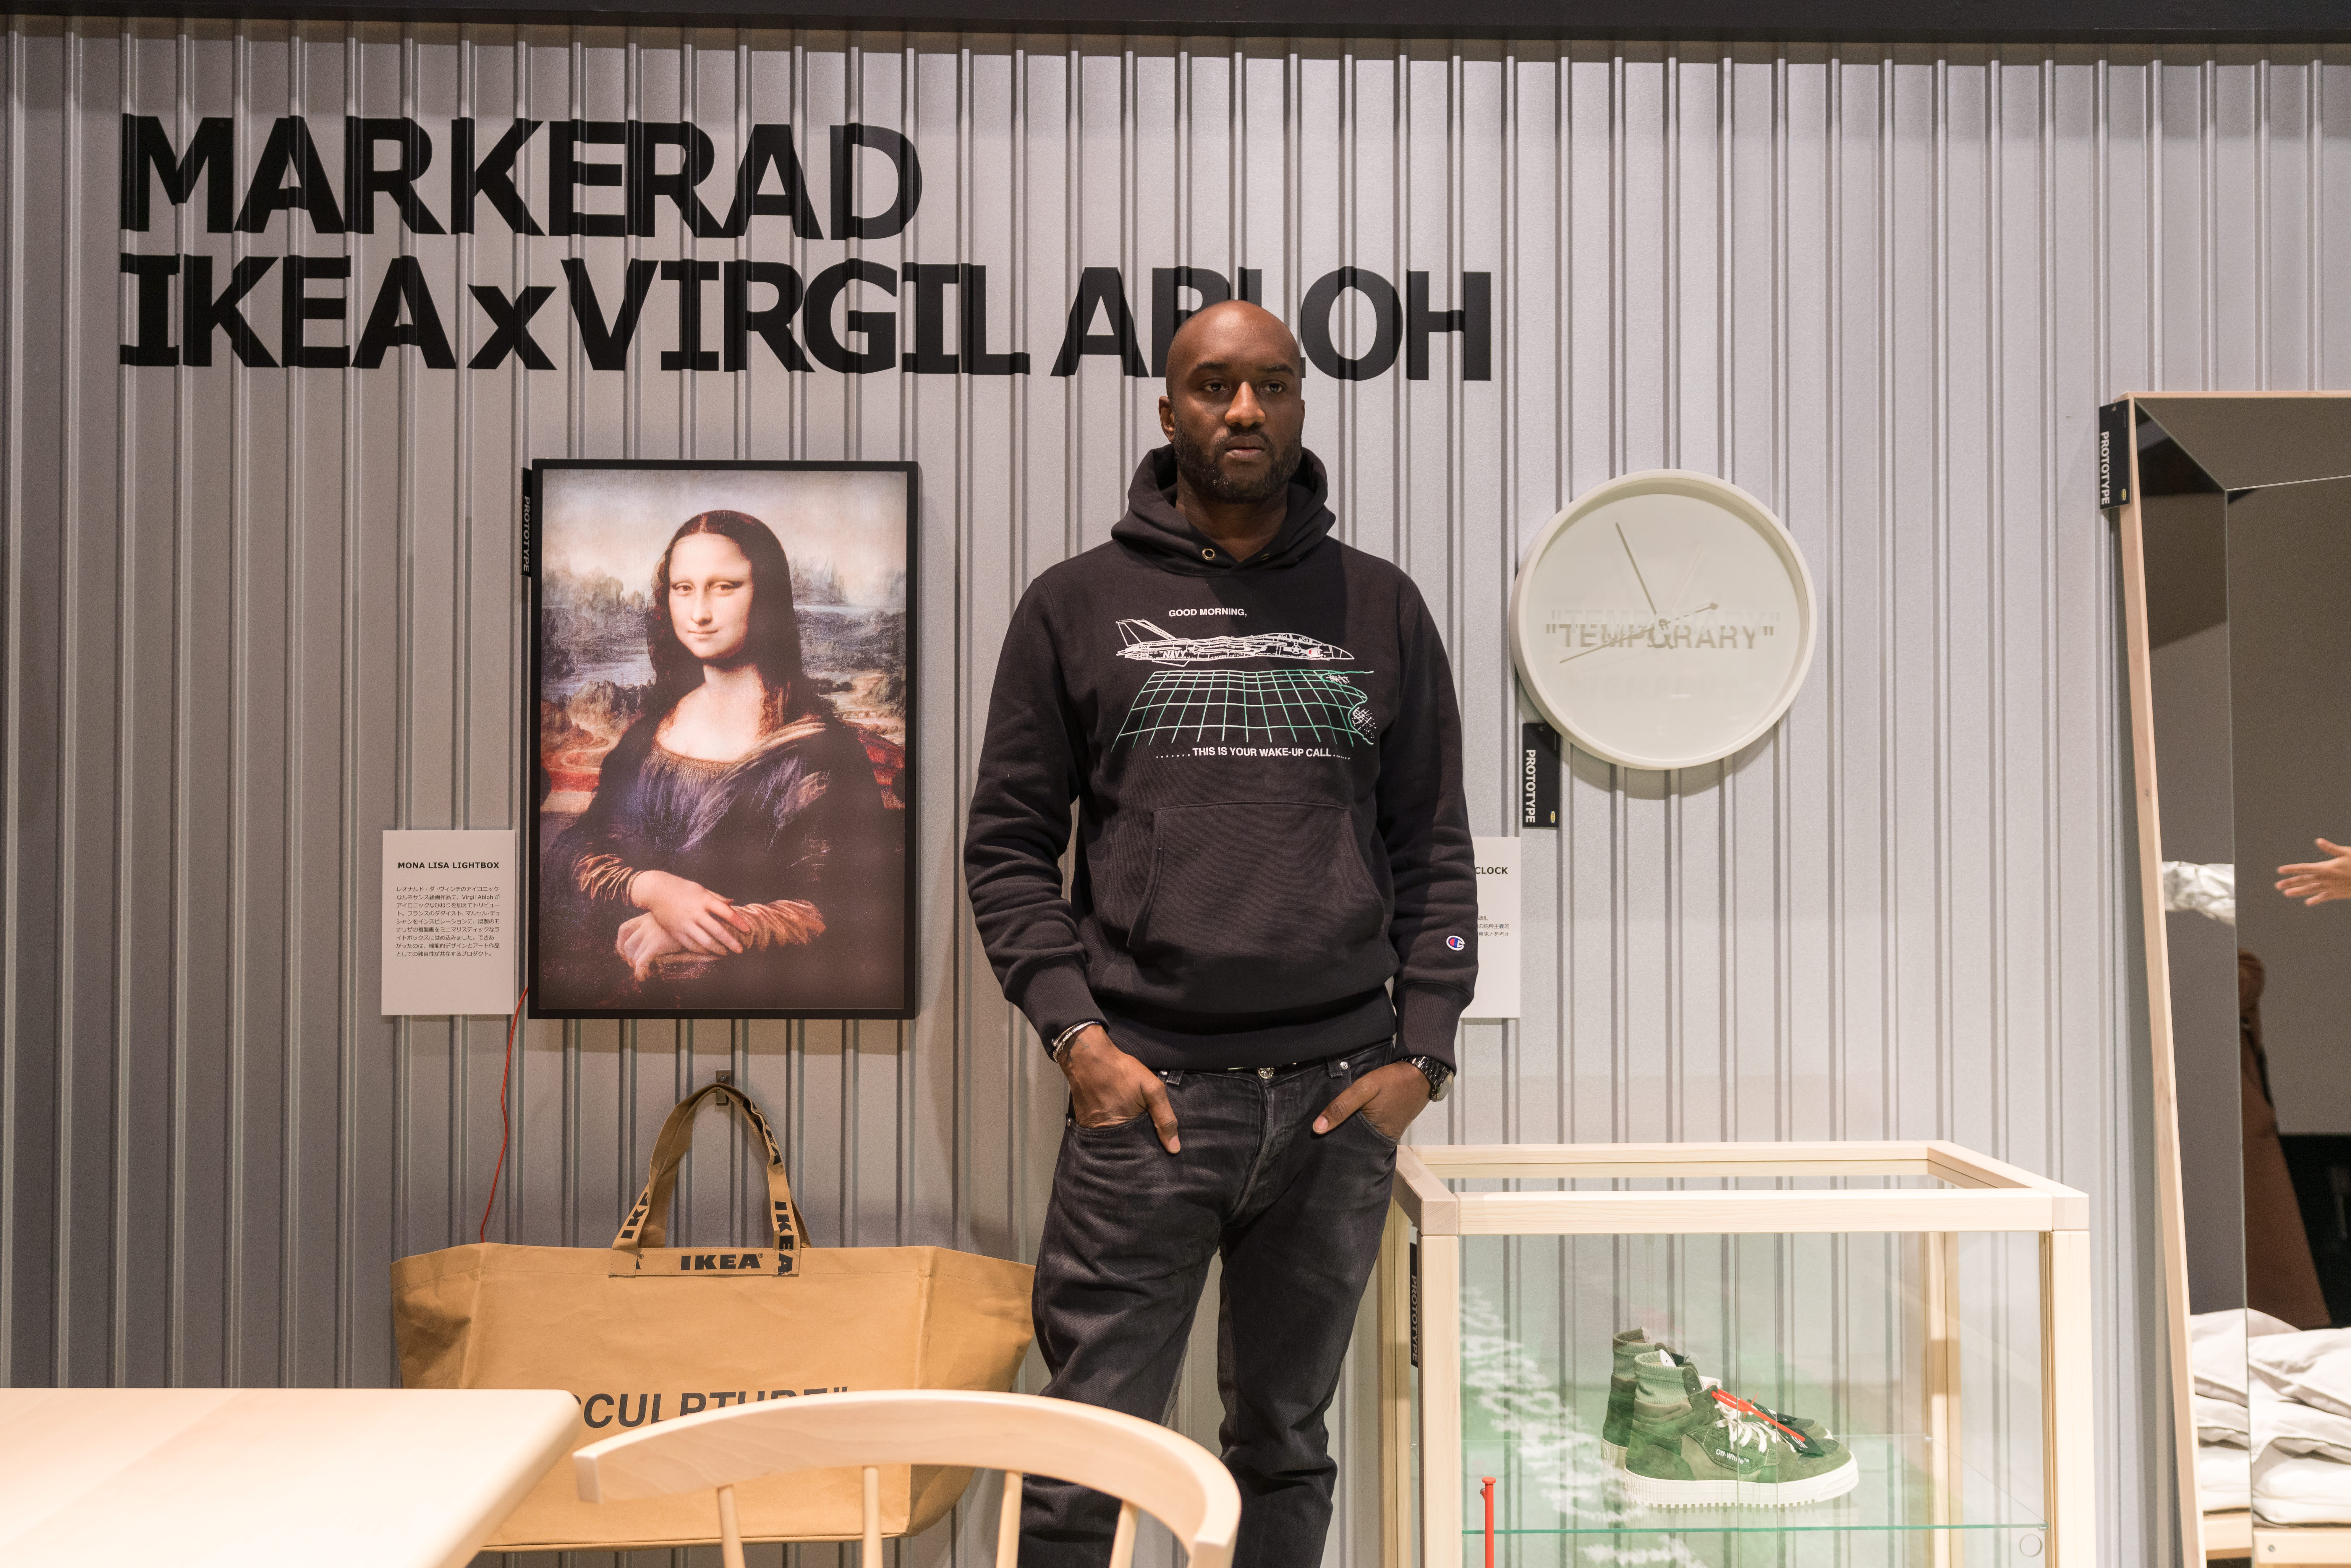 IKEA X OFF WHITE CABINET “MARKERAD” VIRGIL ABLOH LIMITED EDITION ART